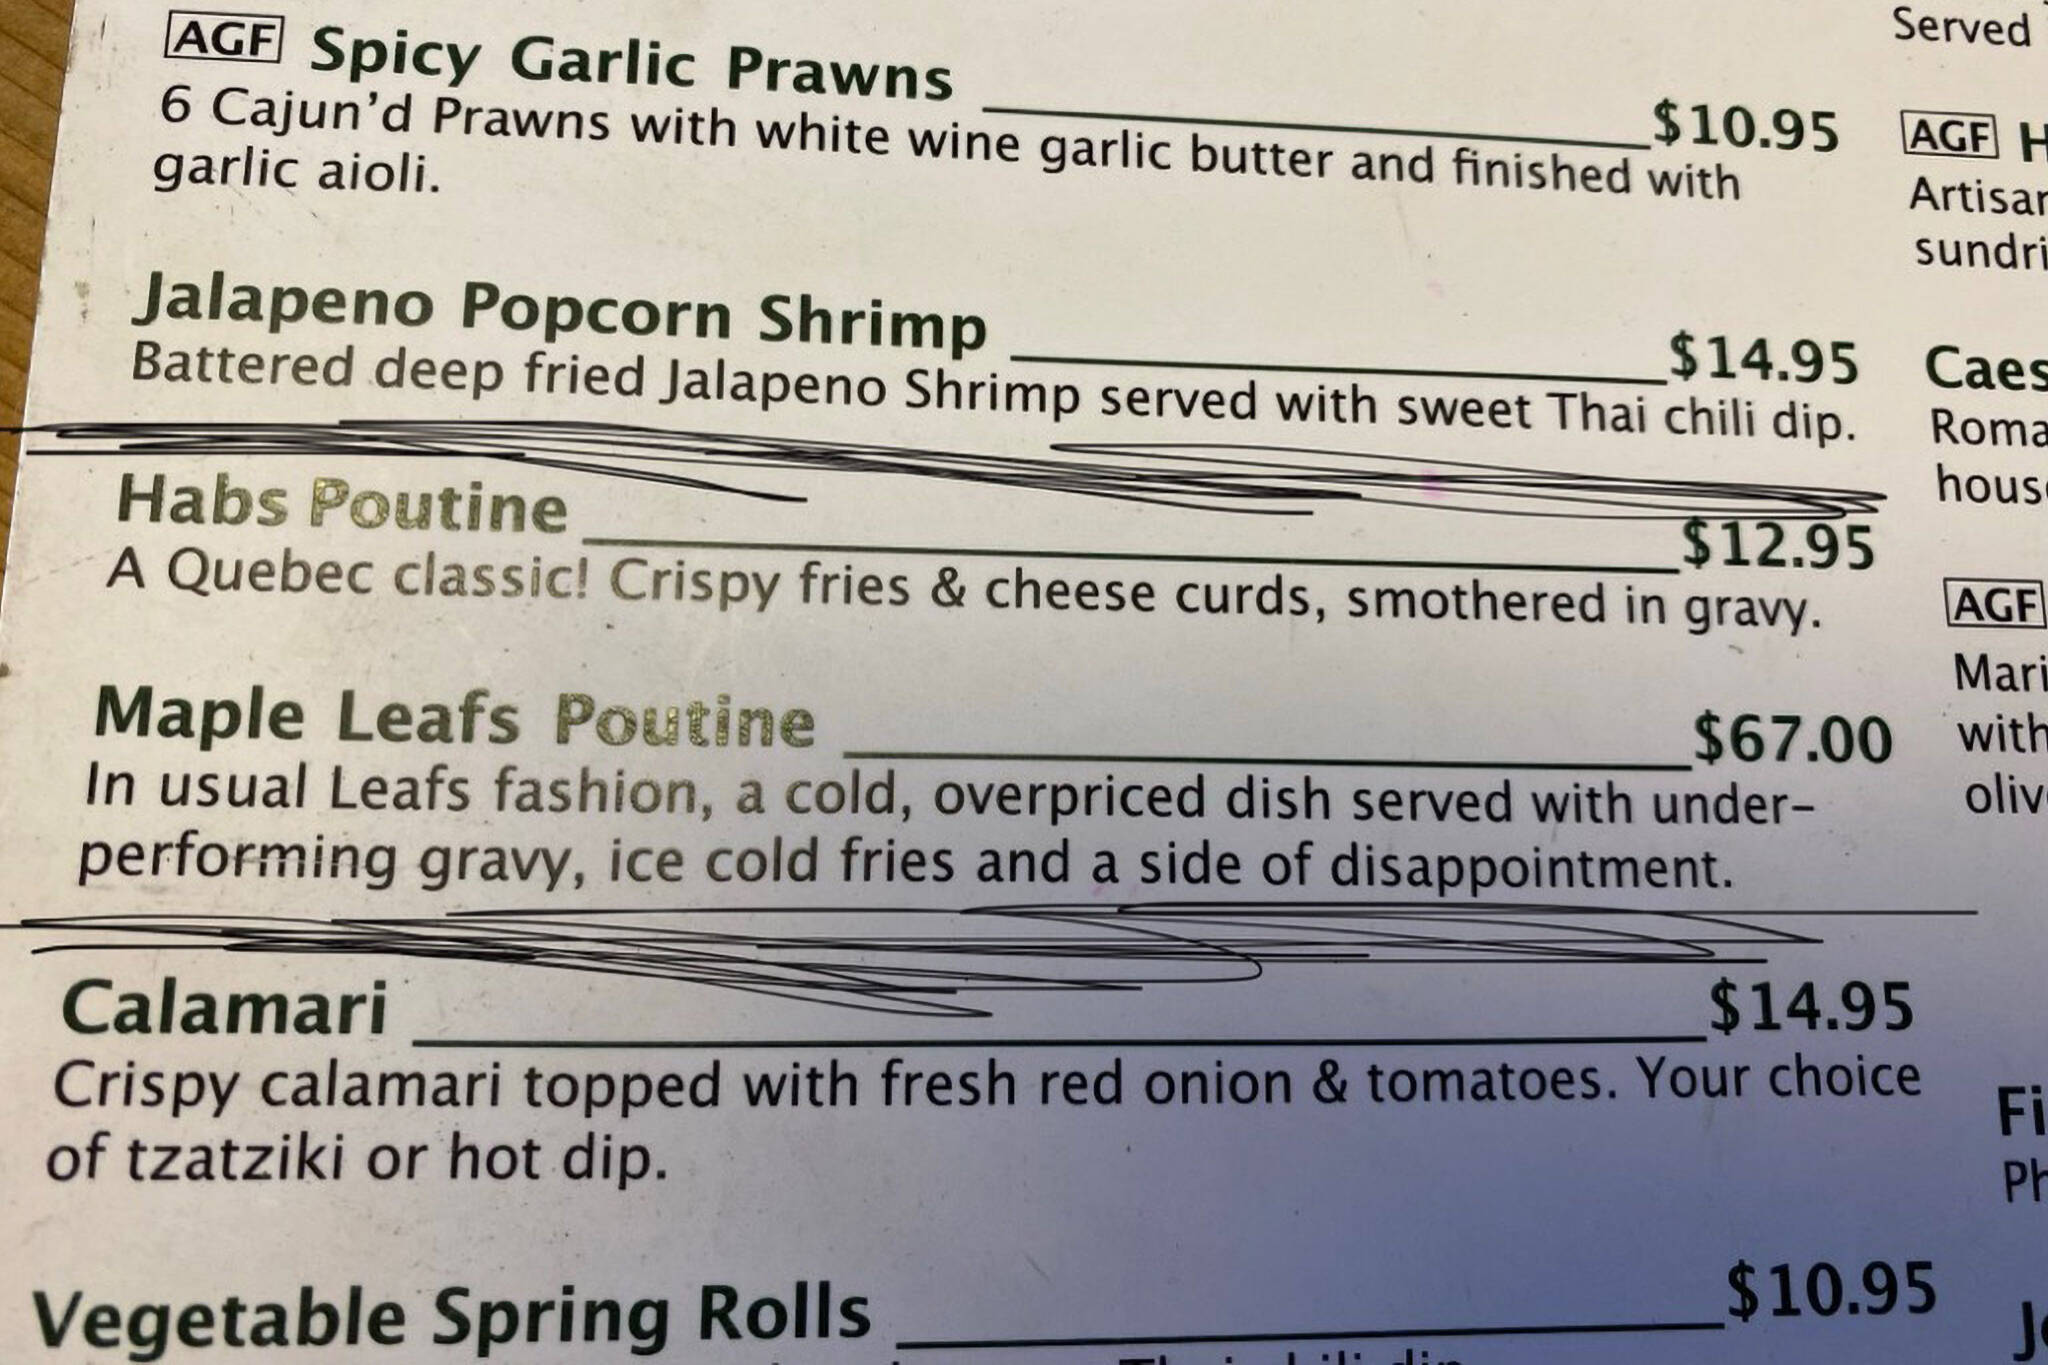 You can get this secret menu item at the Toronto Maple Leafs game Friday